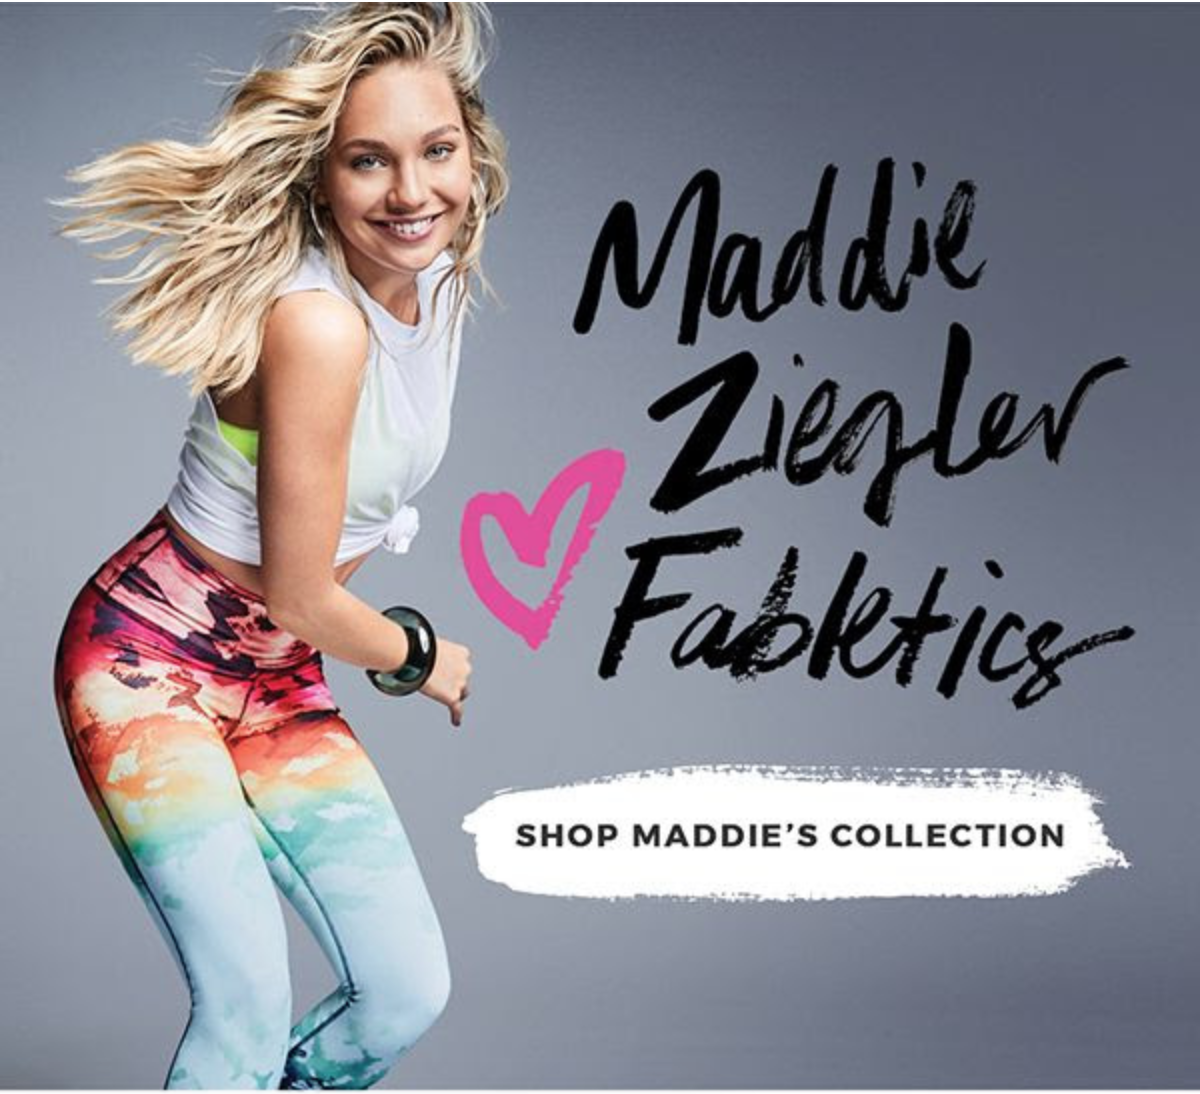 Fabletics x Maddie Ziegler Limited Edition Collection Available Now!